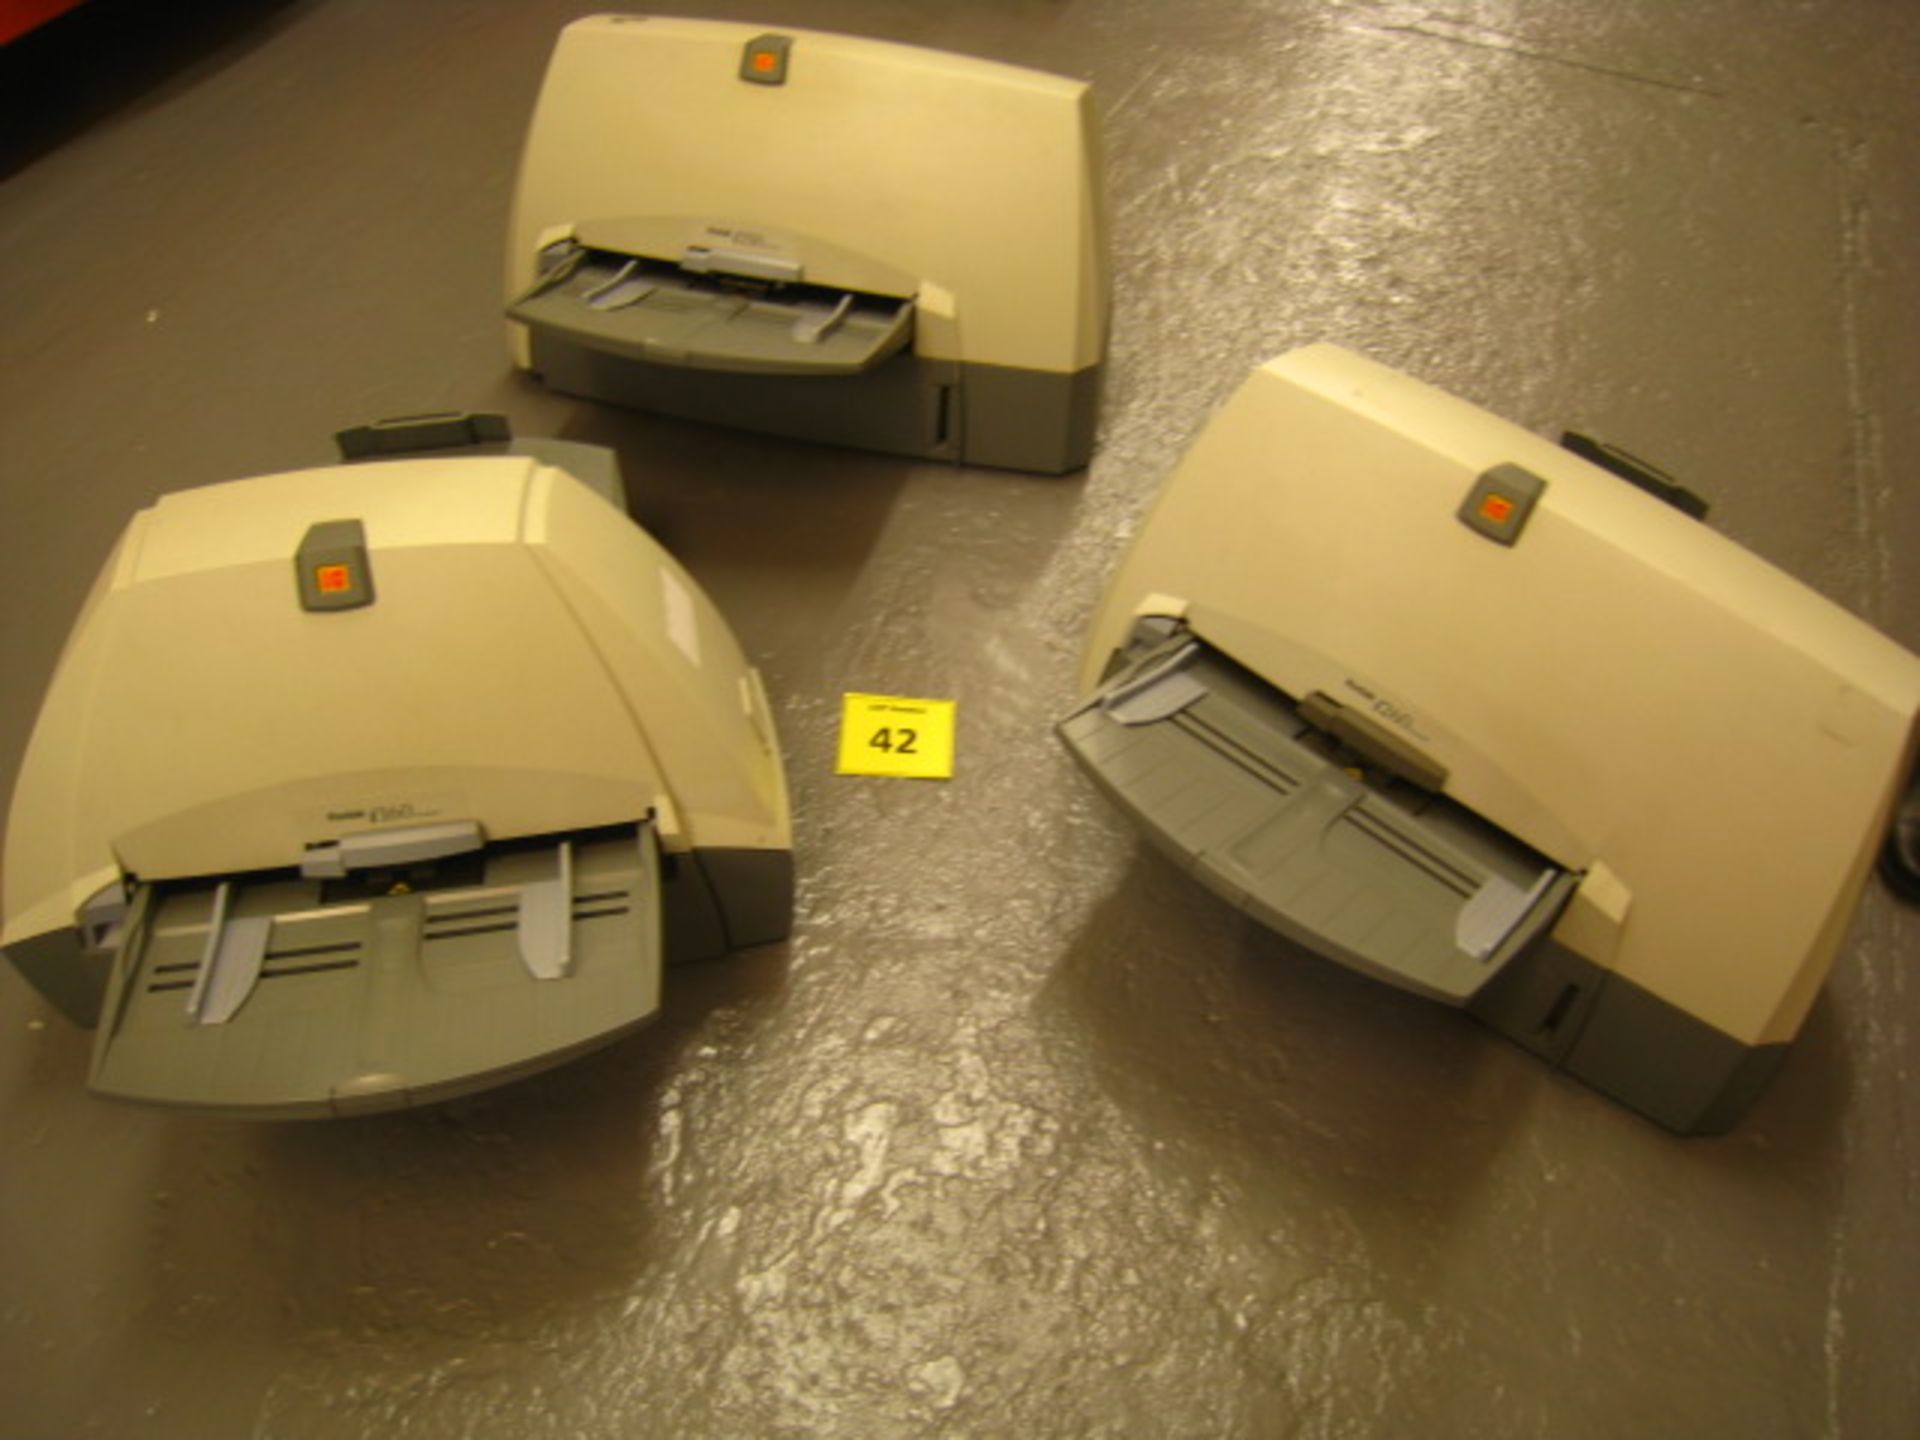 3 KODAK SHEETFEED DOCUMENT SCANNERS 1 x  i160, 1 x I250, 1 x I260.  ALL POWER UP BUT WITHOUT PSUS.